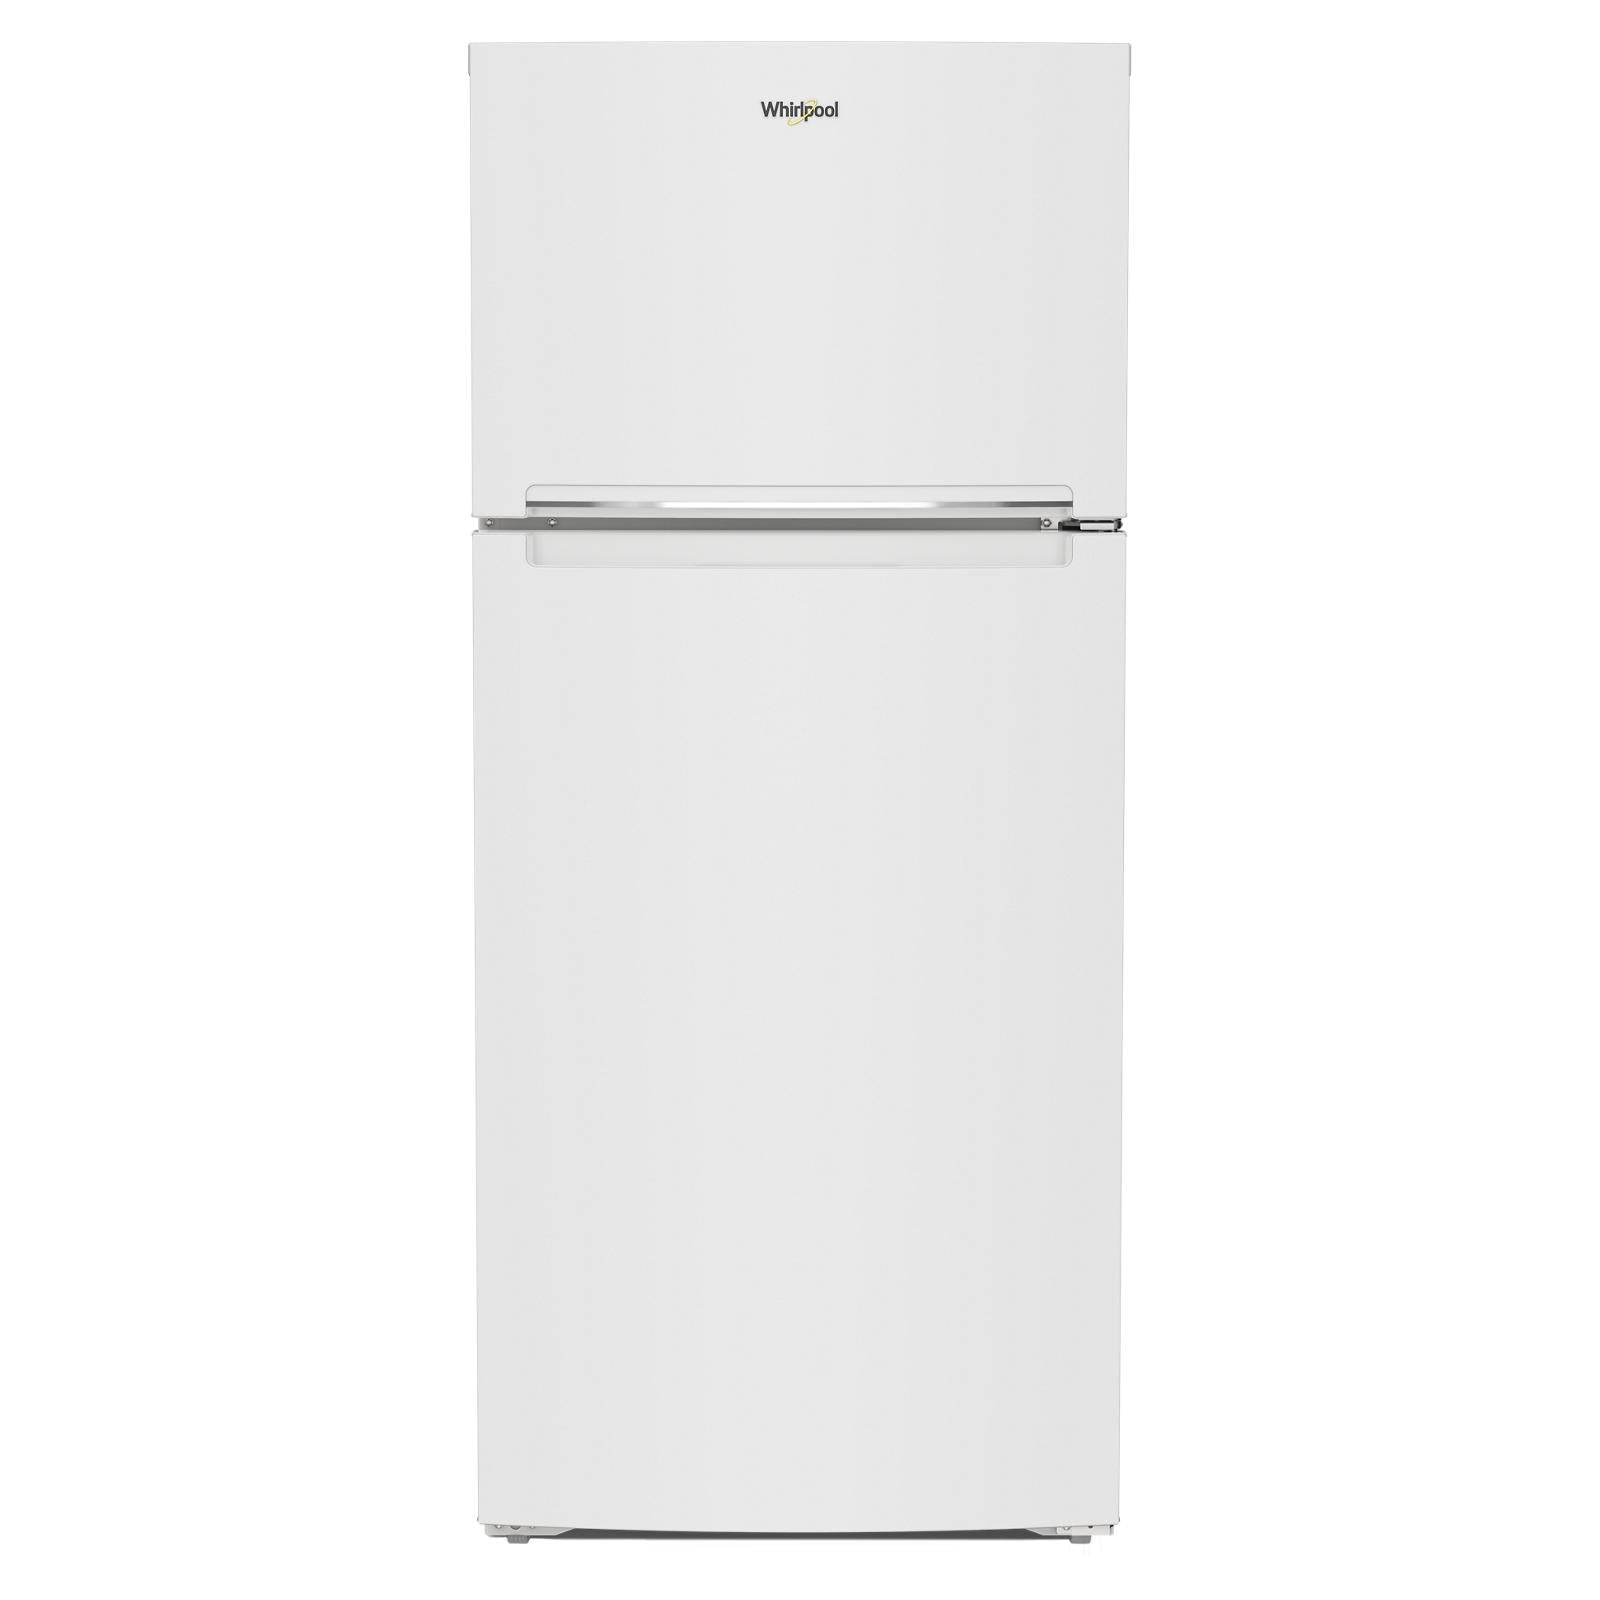 Whirlpool - 28.13 Inch 16.3 cu. ft Top Mount Refrigerator in White - WRTX5328PW